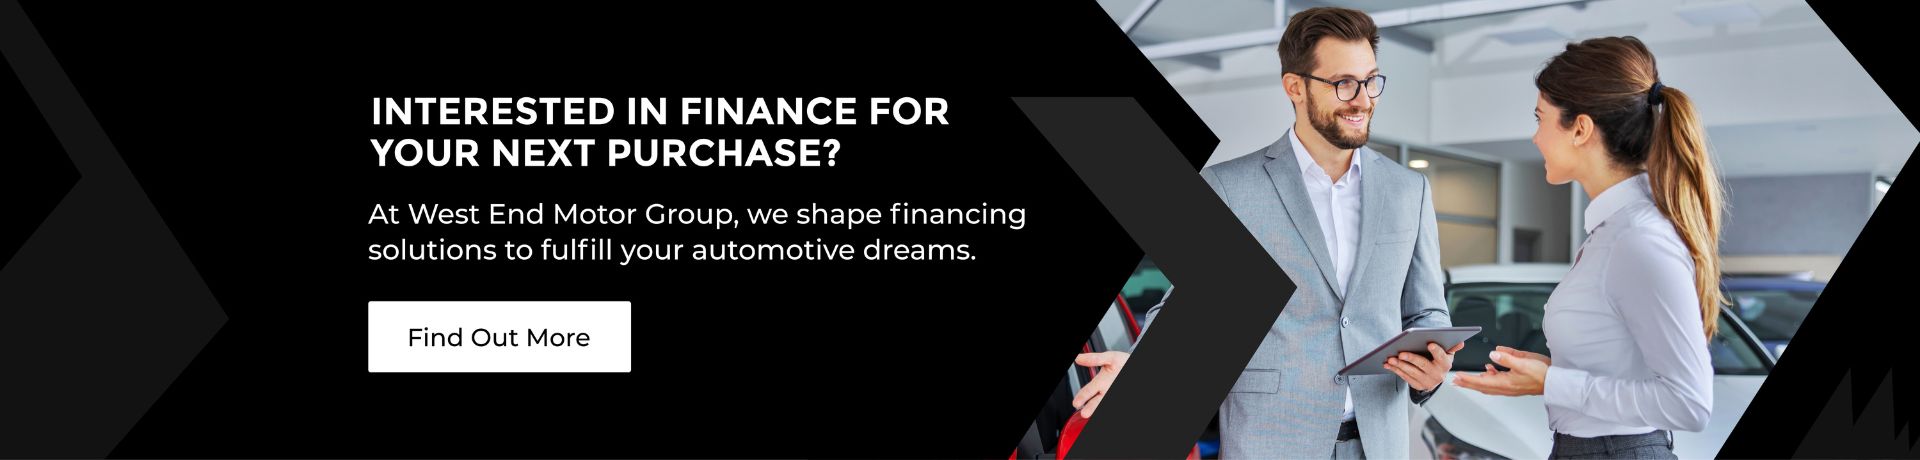 Finance - We shape financing solutions to fulfill your automotive dreams.